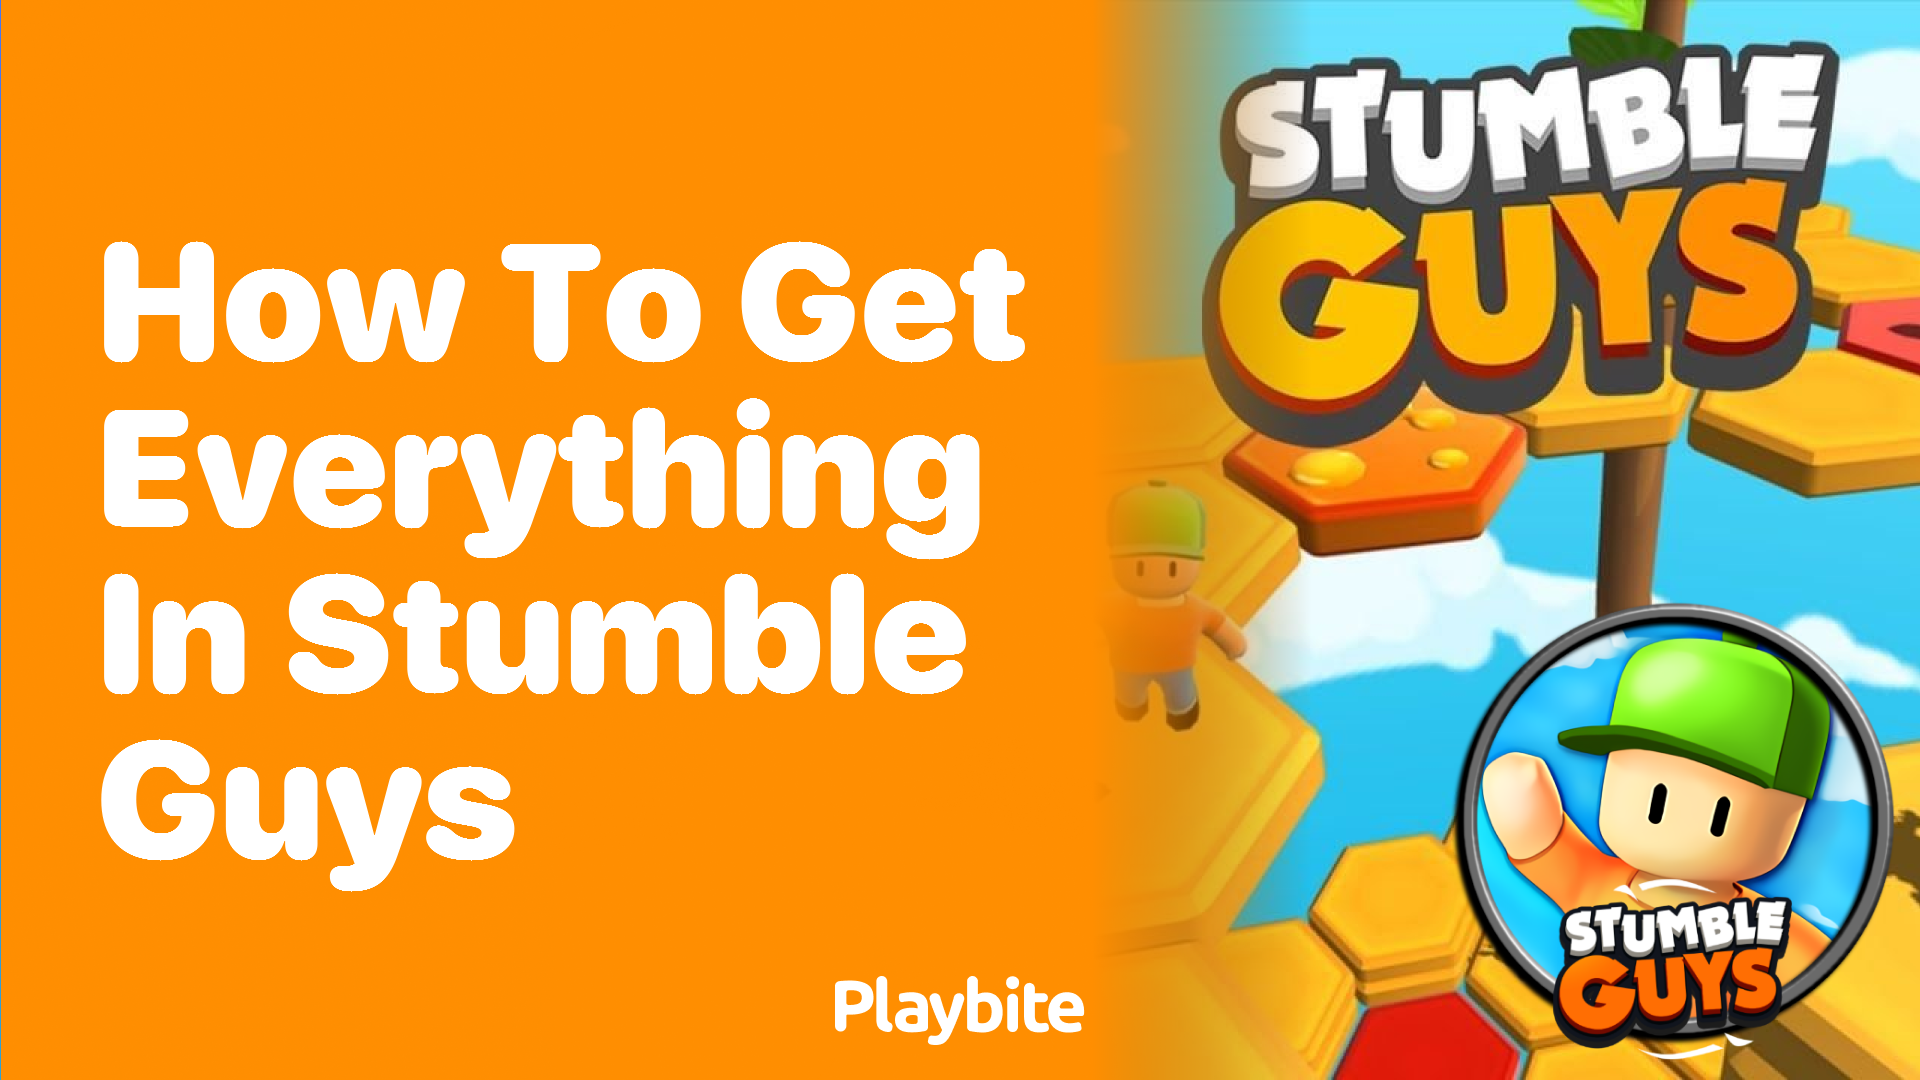 How to Get Everything in Stumble Guys